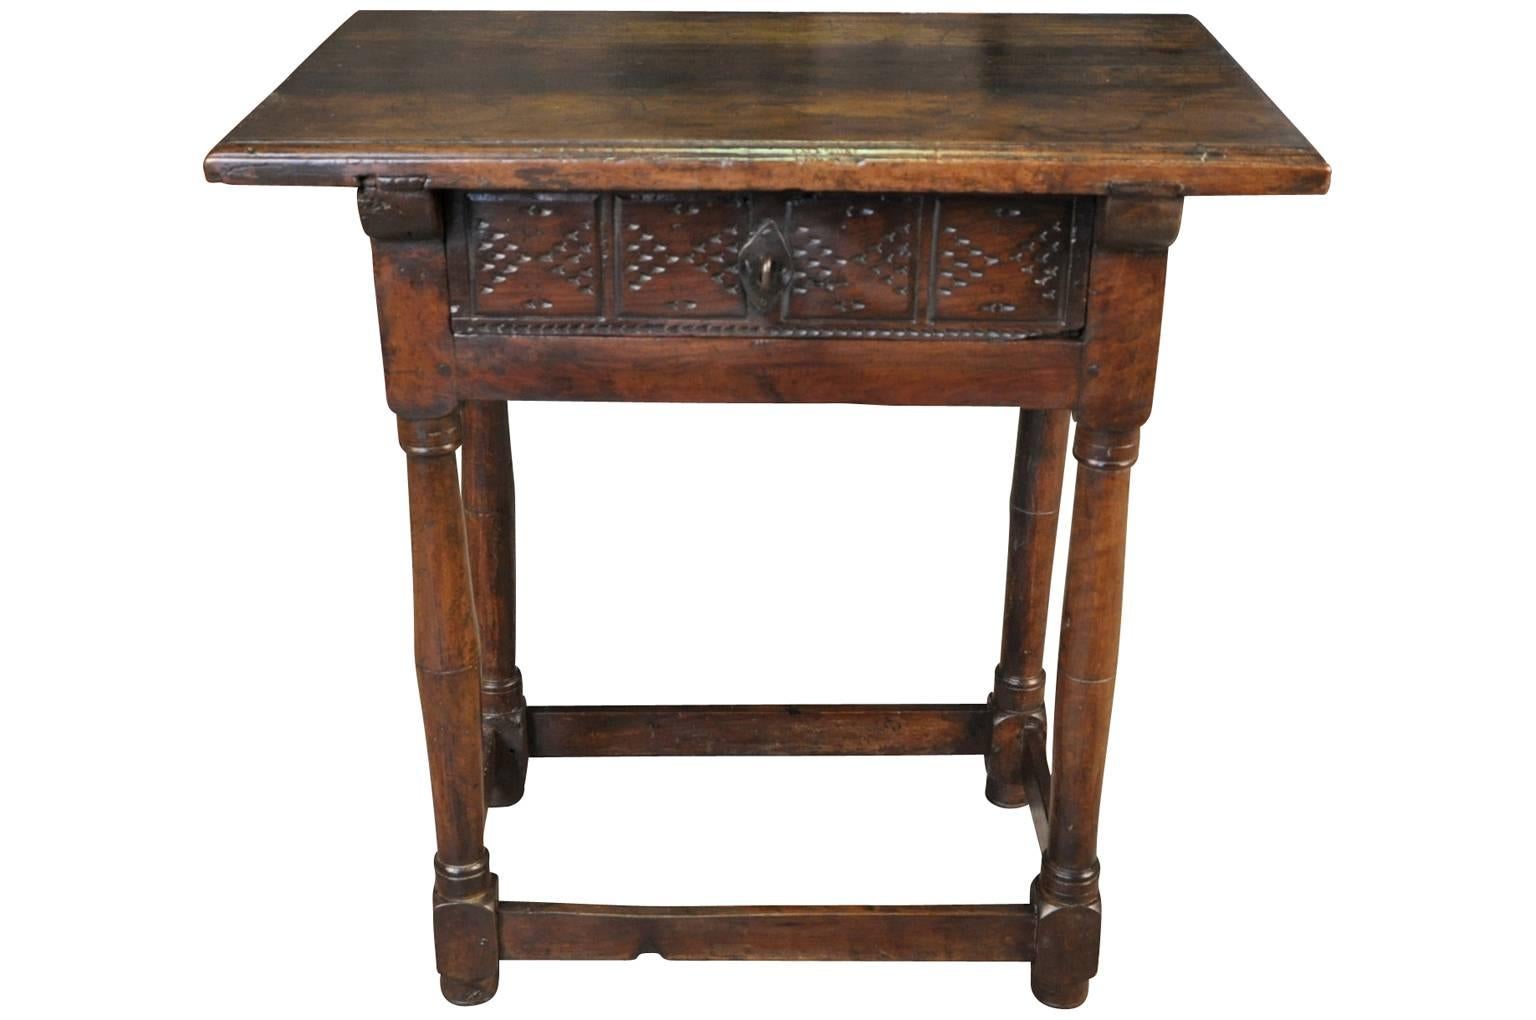 A very handsome 17th century side table from Valencia, Spain. Beautifully constructed from stunning walnut with a single draw with a carved fascia and very interesting turned legs. Wonderful patina, rich and luminous.